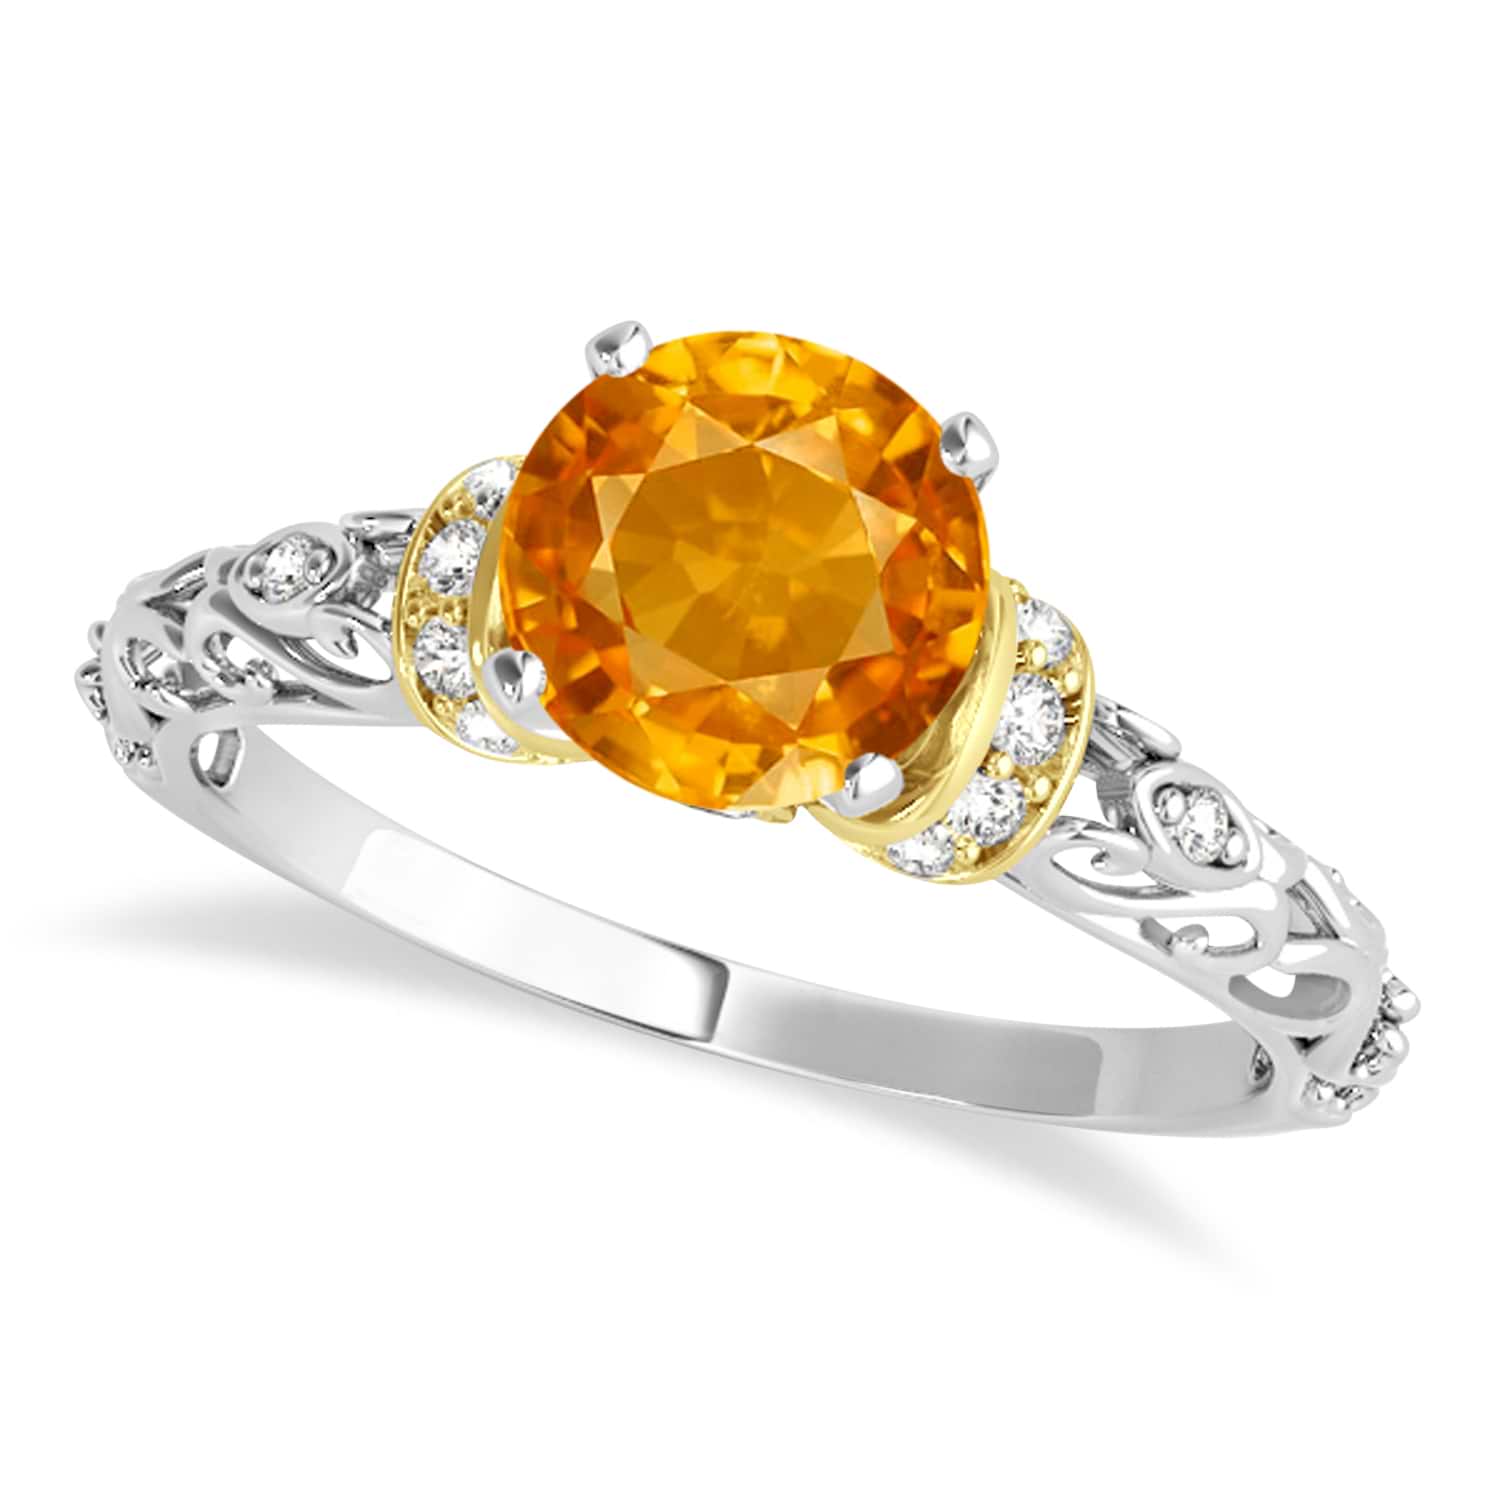 Citrine & Diamond Antique Style Engagement Ring 18k Two-Tone Gold (1.62ct)